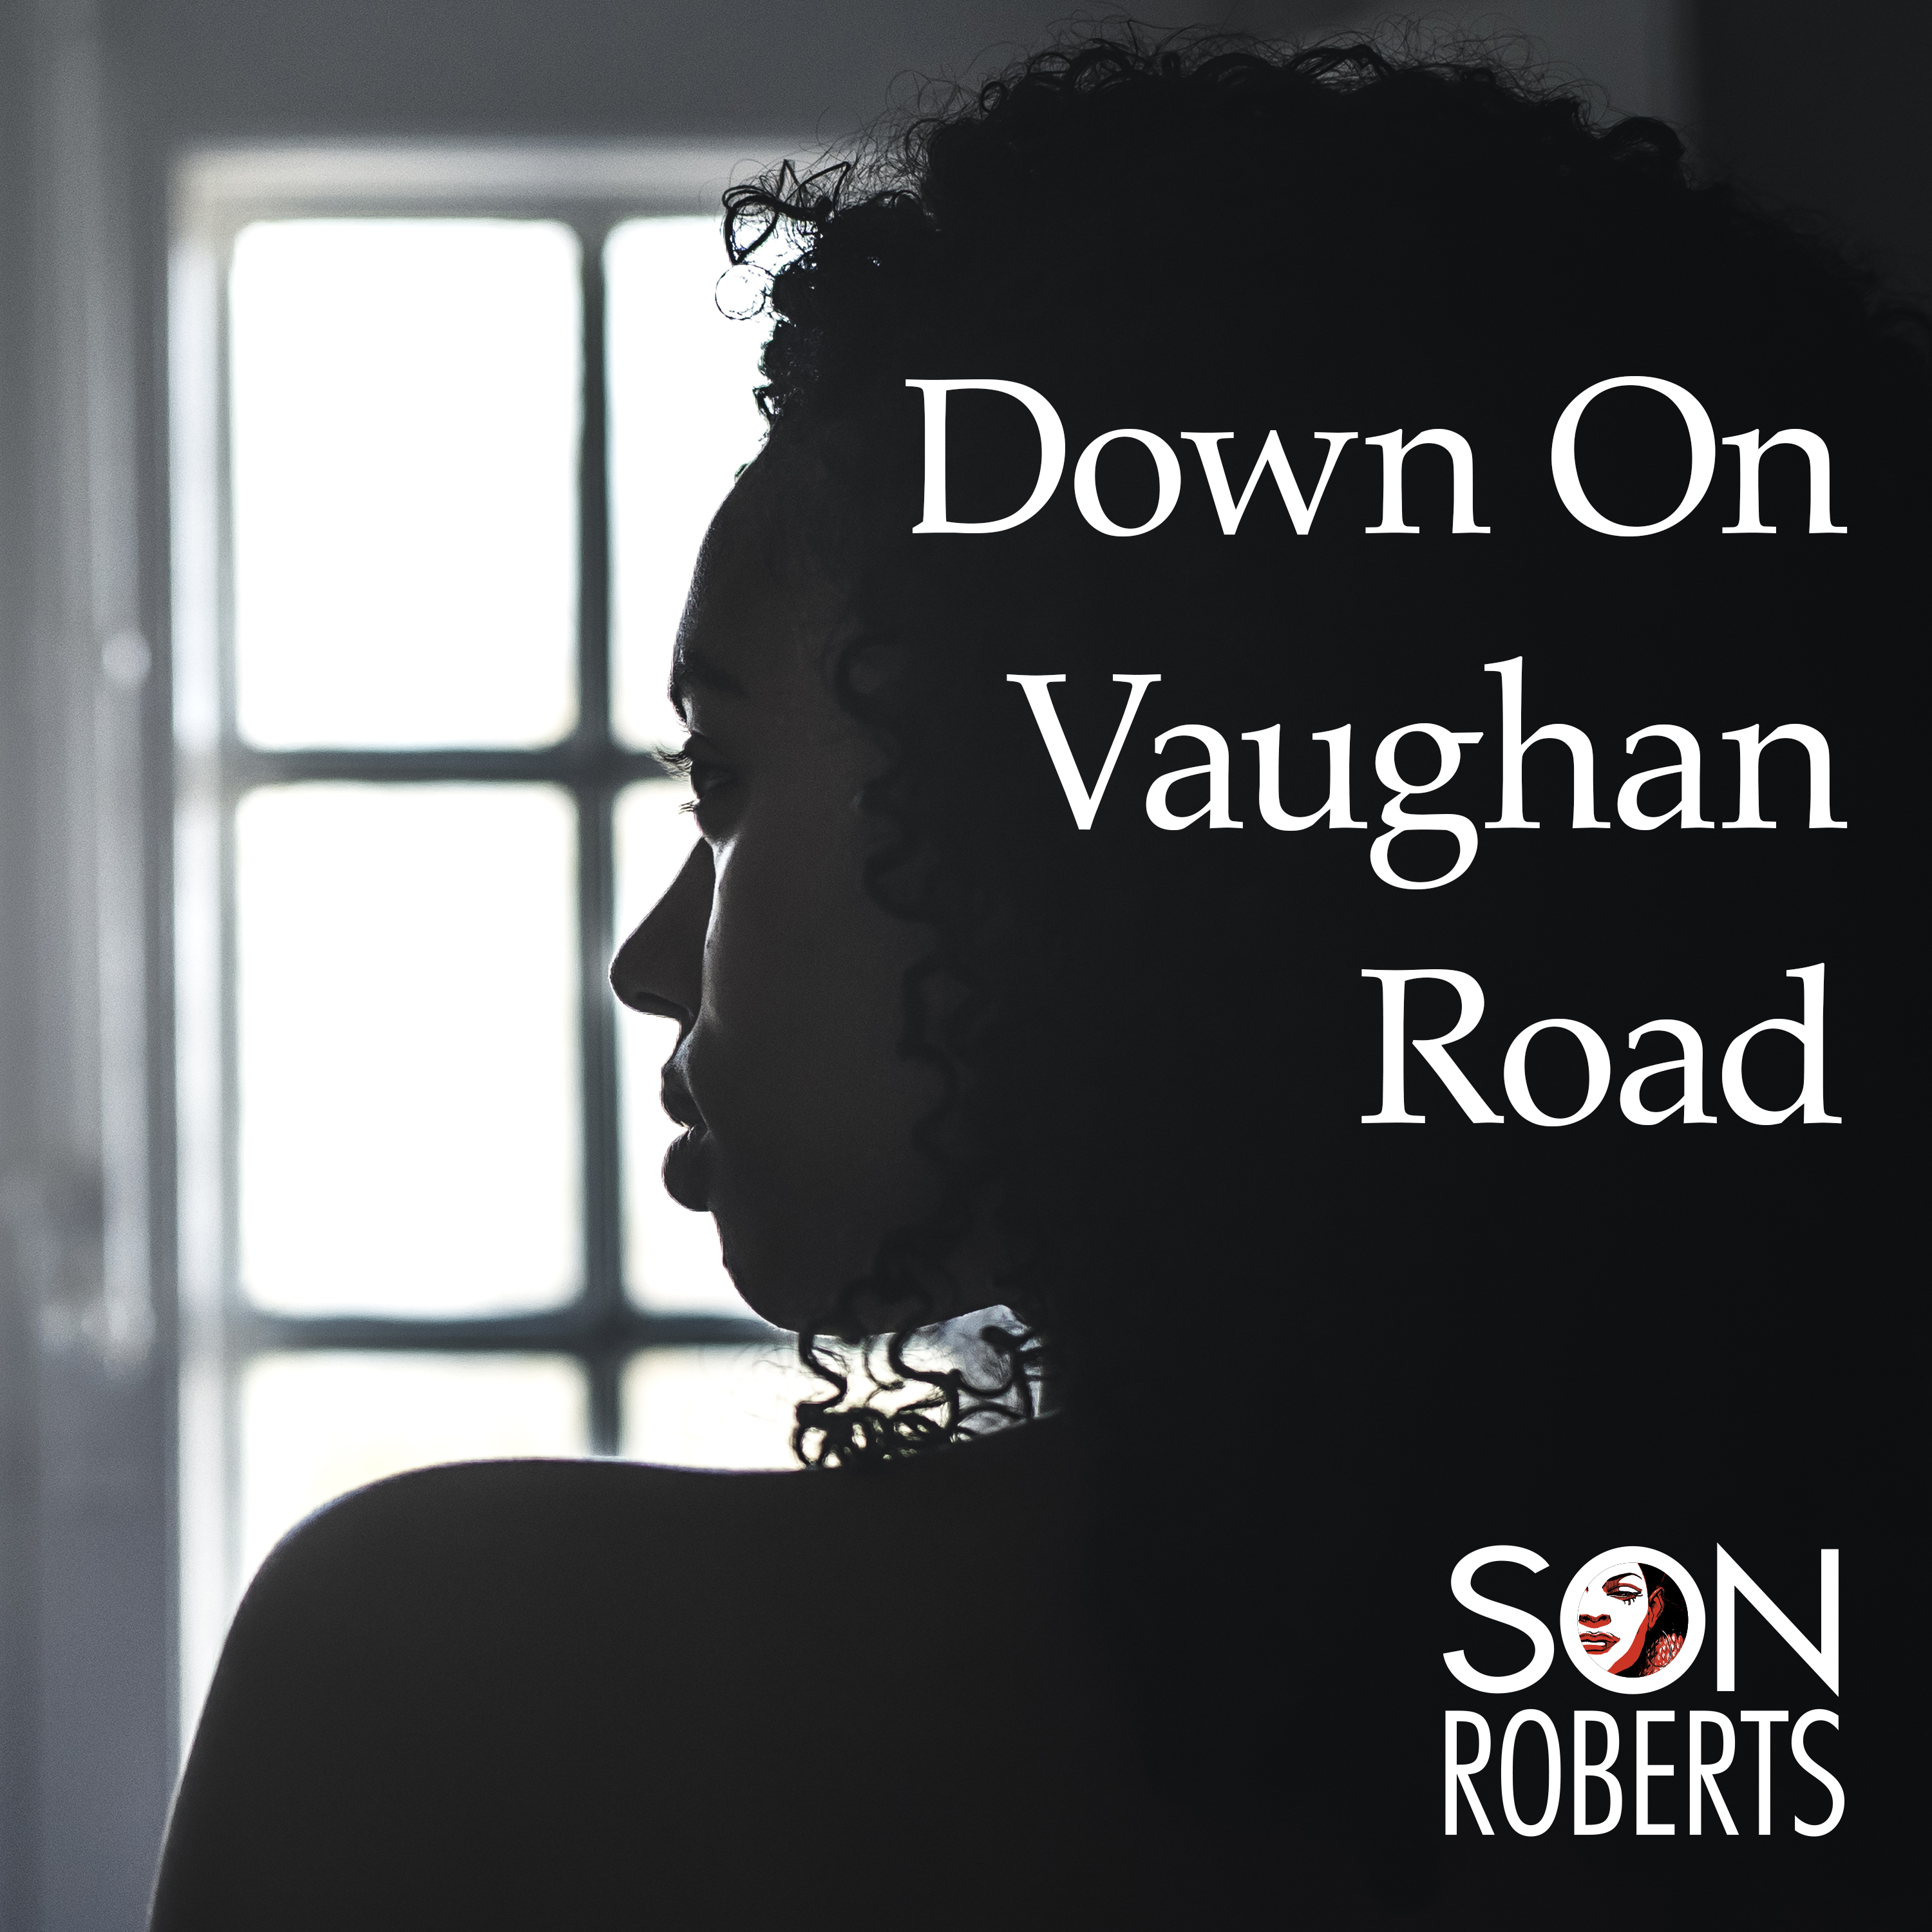 Down on Vaughan Road Single Cover Art